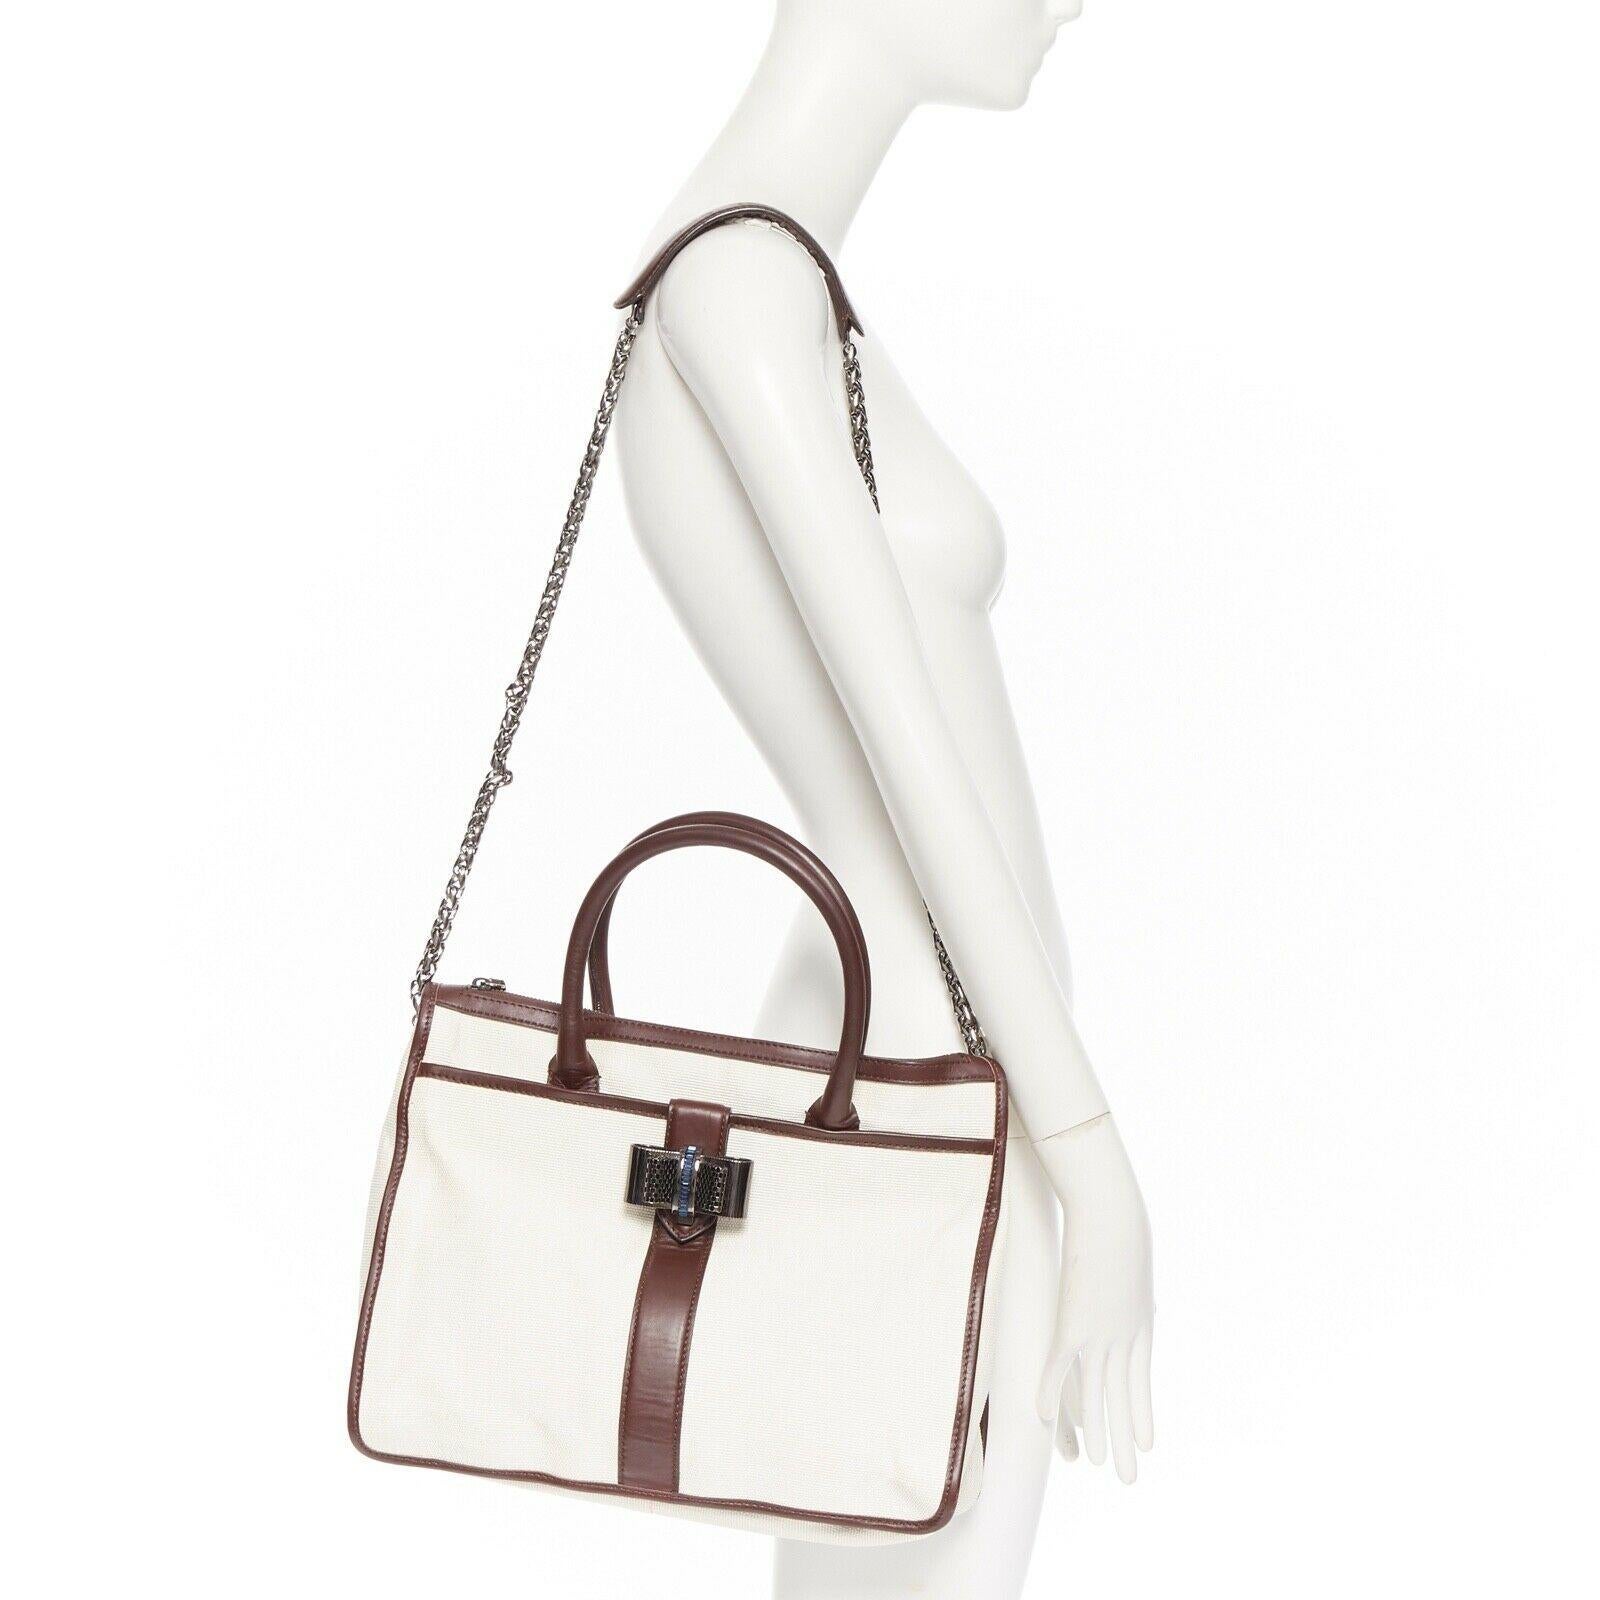 CHRISTIAN LOUBOUTIN Sweet Charity beige canvas silver metal bow chain tote bag
Designer: CHRISTIAN LOUBOUTIN
Model / Season: Sweet Charity
Material: Canvas
Color: Beige
Pattern: Plain
Description: Dual handle tote bag. Brown leather piping. Front